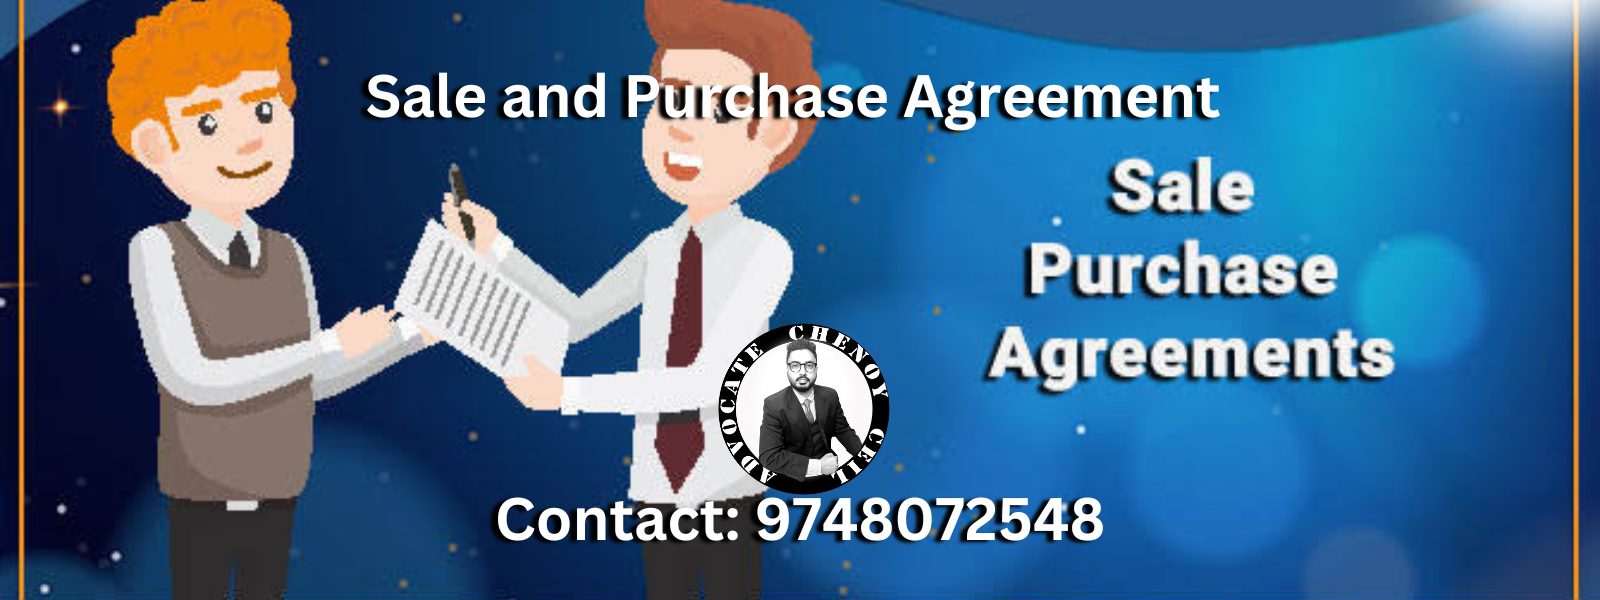 Format of Sale and Purchase Agreement